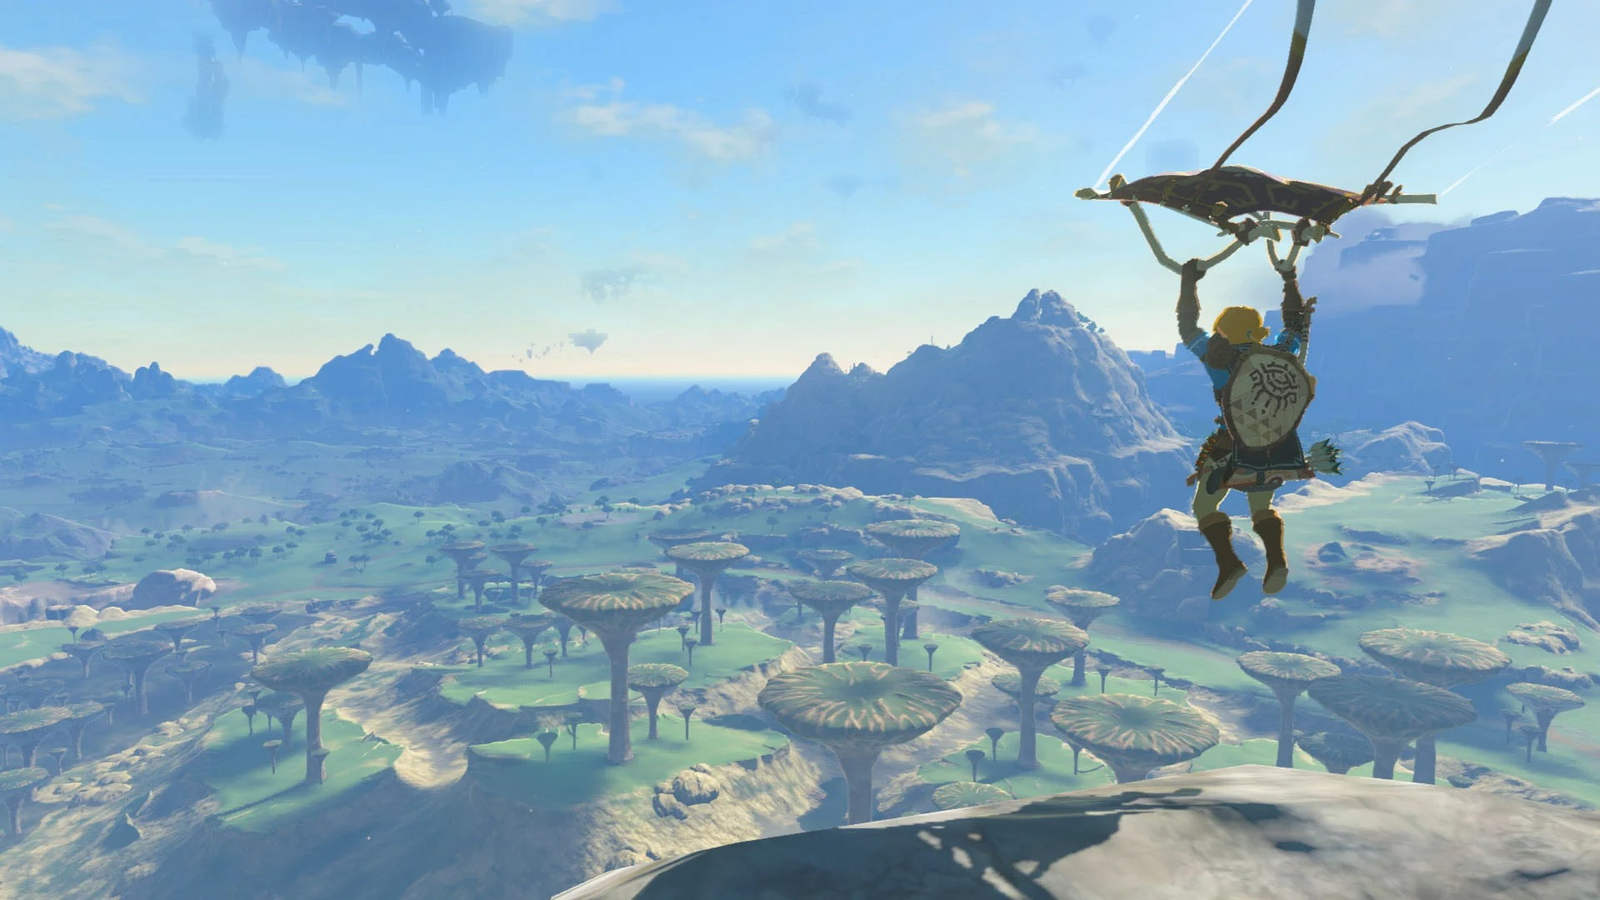 The Legend of Zelda: Tears of the Kingdom review: no limits